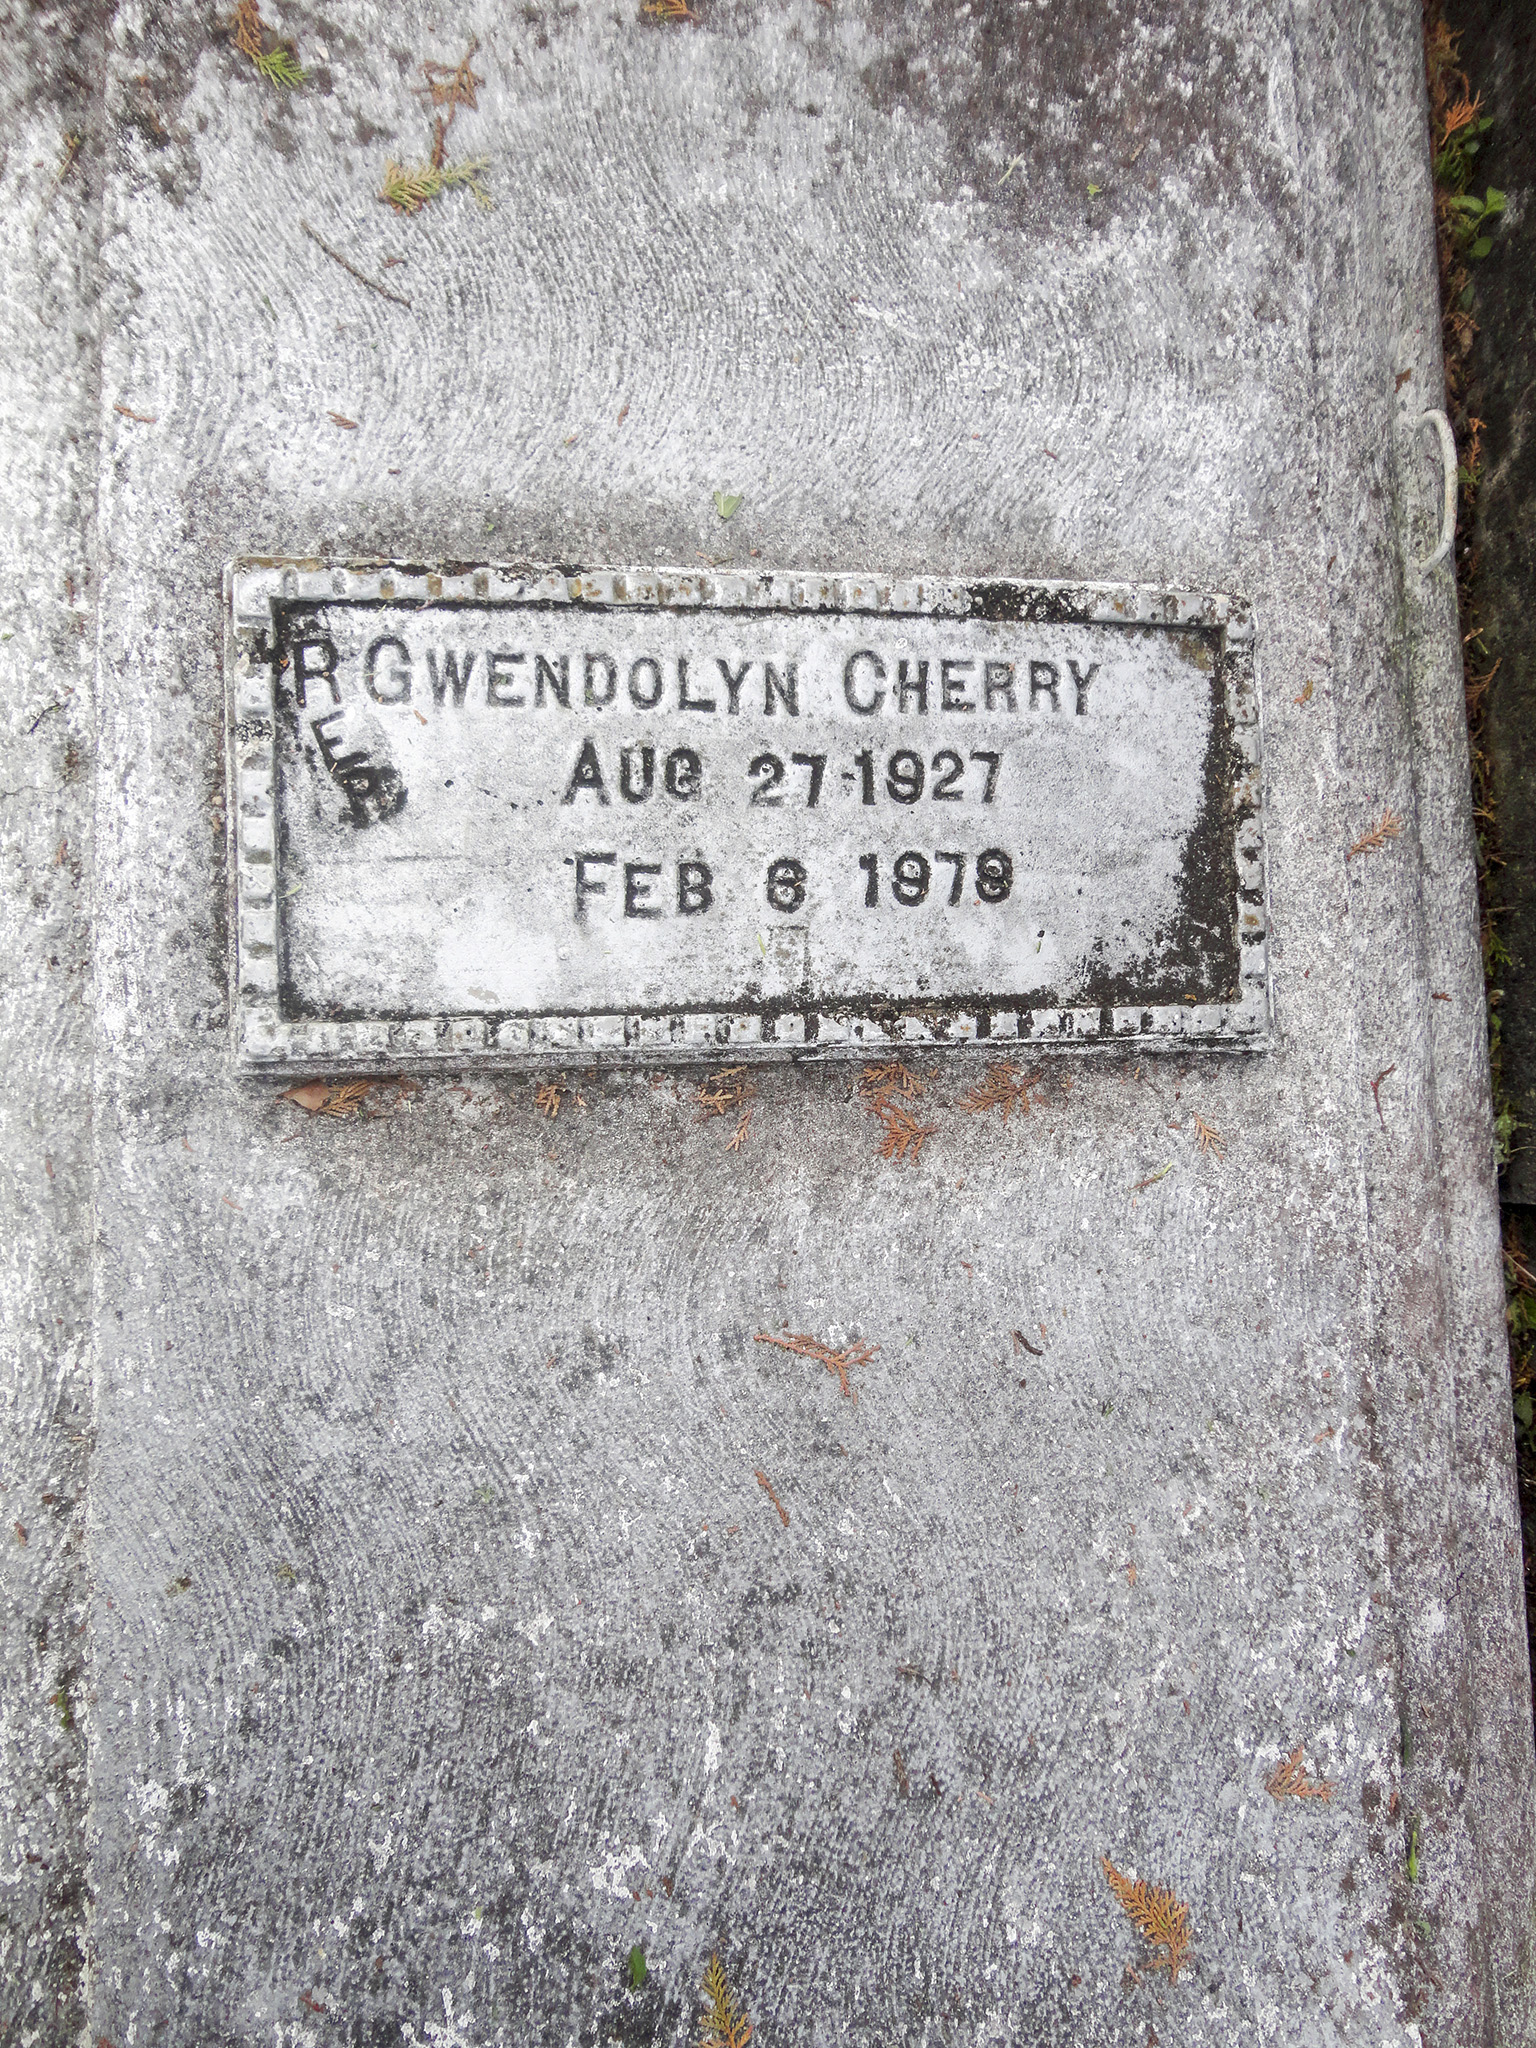 The tomb of Gwendolyn Cherry with the dates of her birth and death.